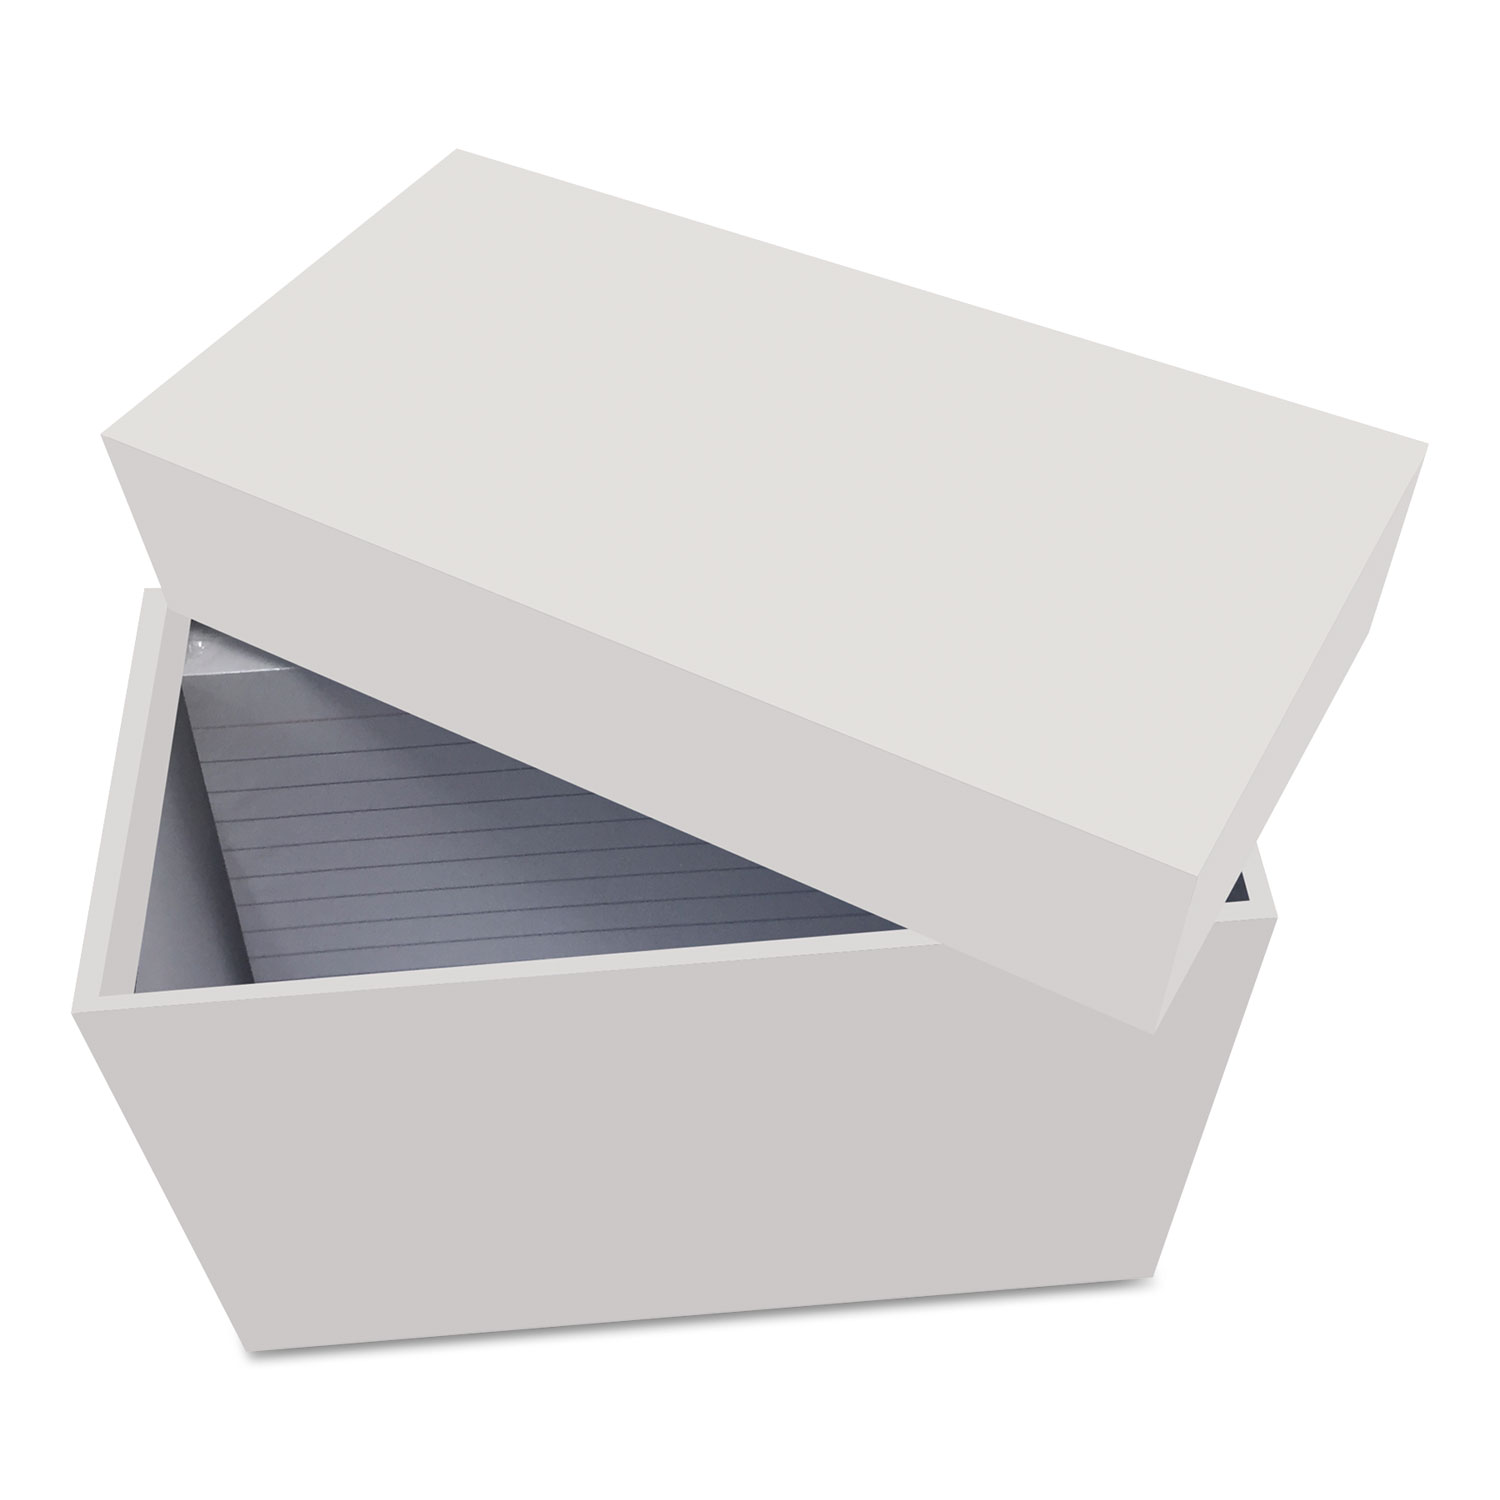  Universal UNV47280 Index Card Box with 100 Ruled Index Cards, 3 x 5, Gray (UNV47280) 